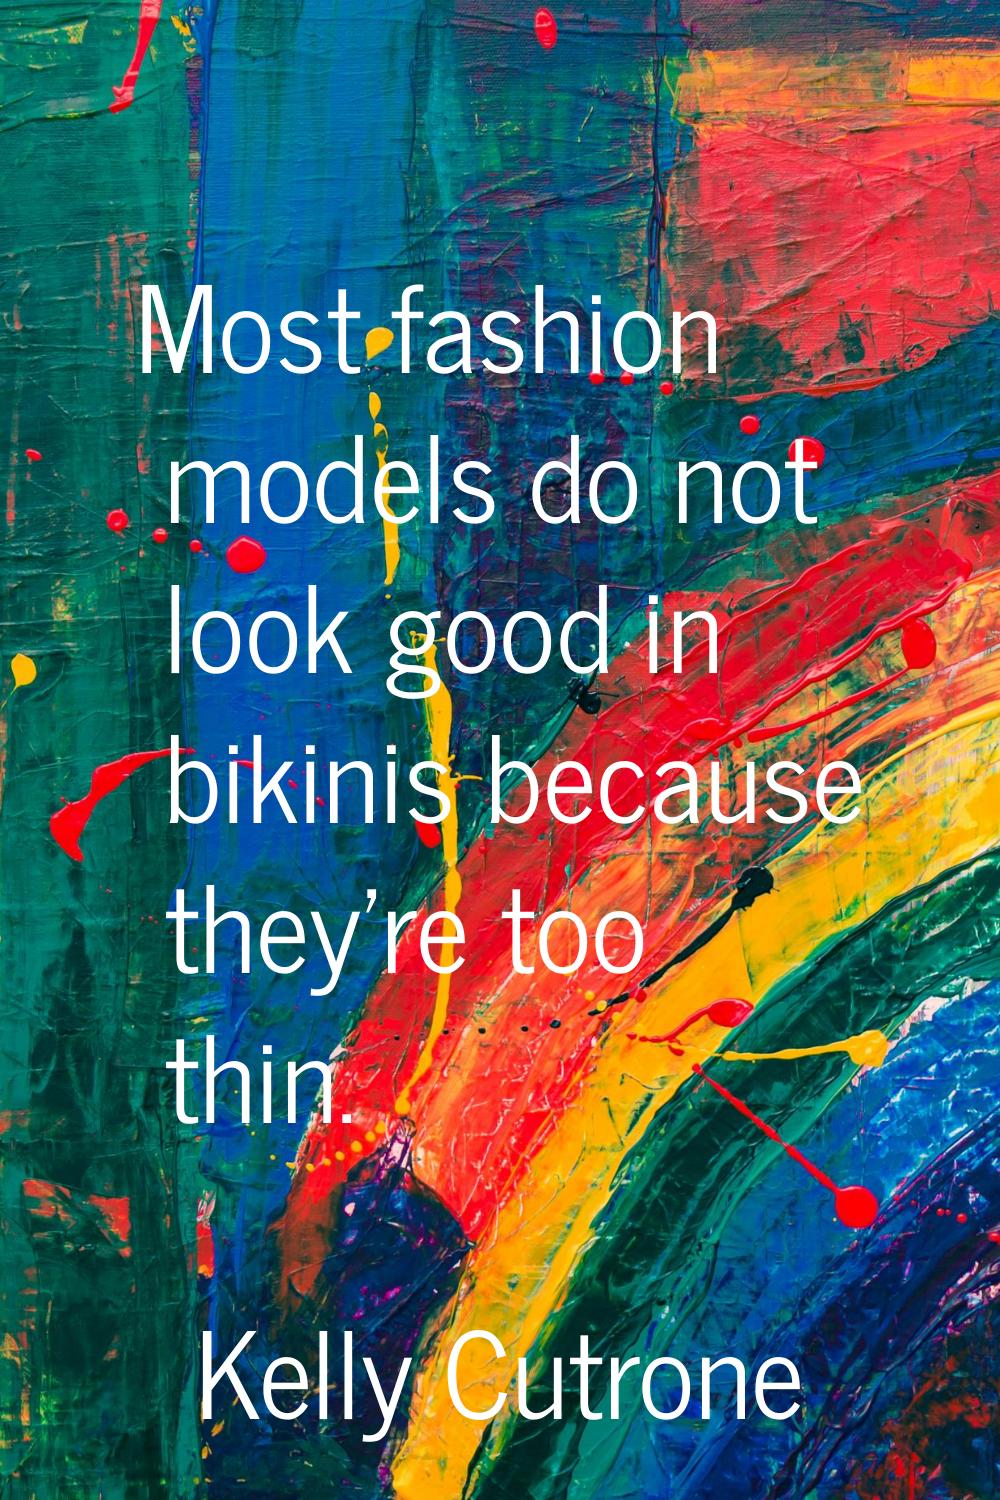 Most fashion models do not look good in bikinis because they're too thin.